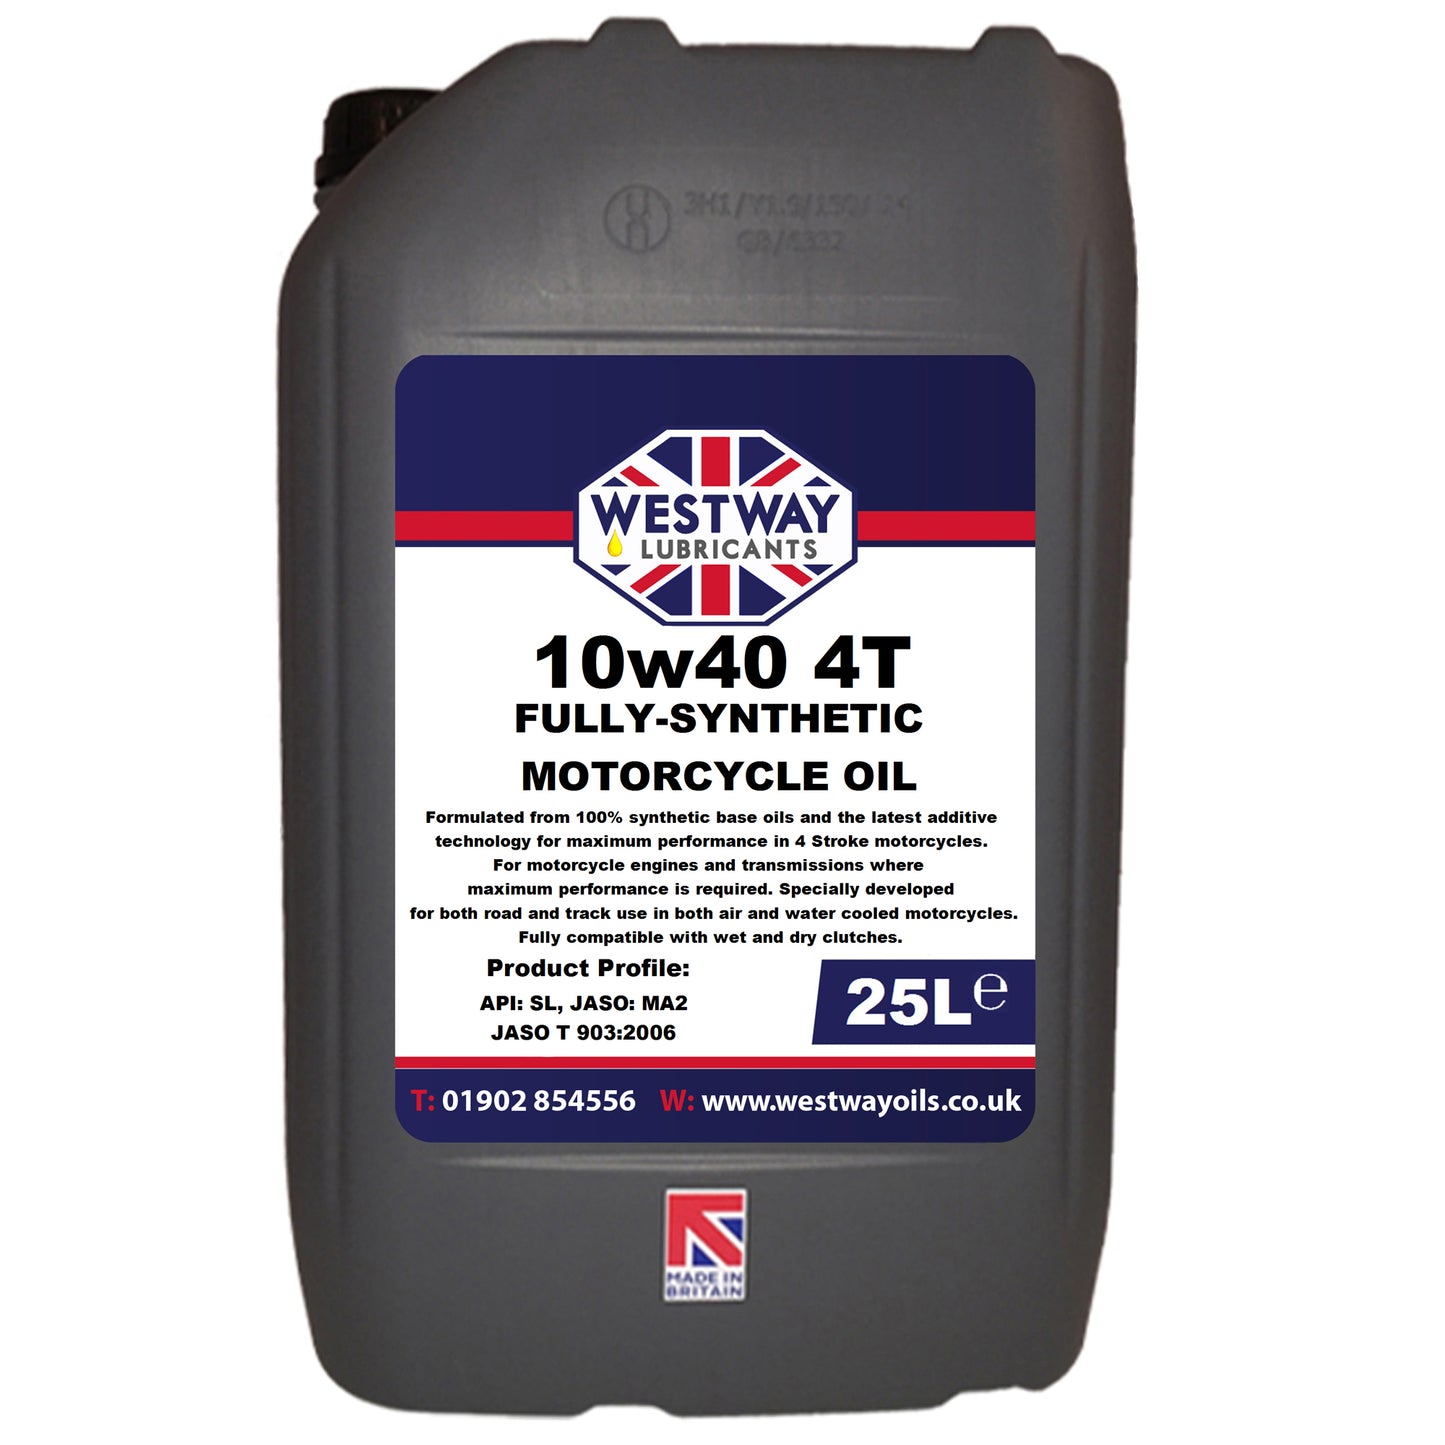 10w40 4T Fully Synthetic Motorcycle Oil